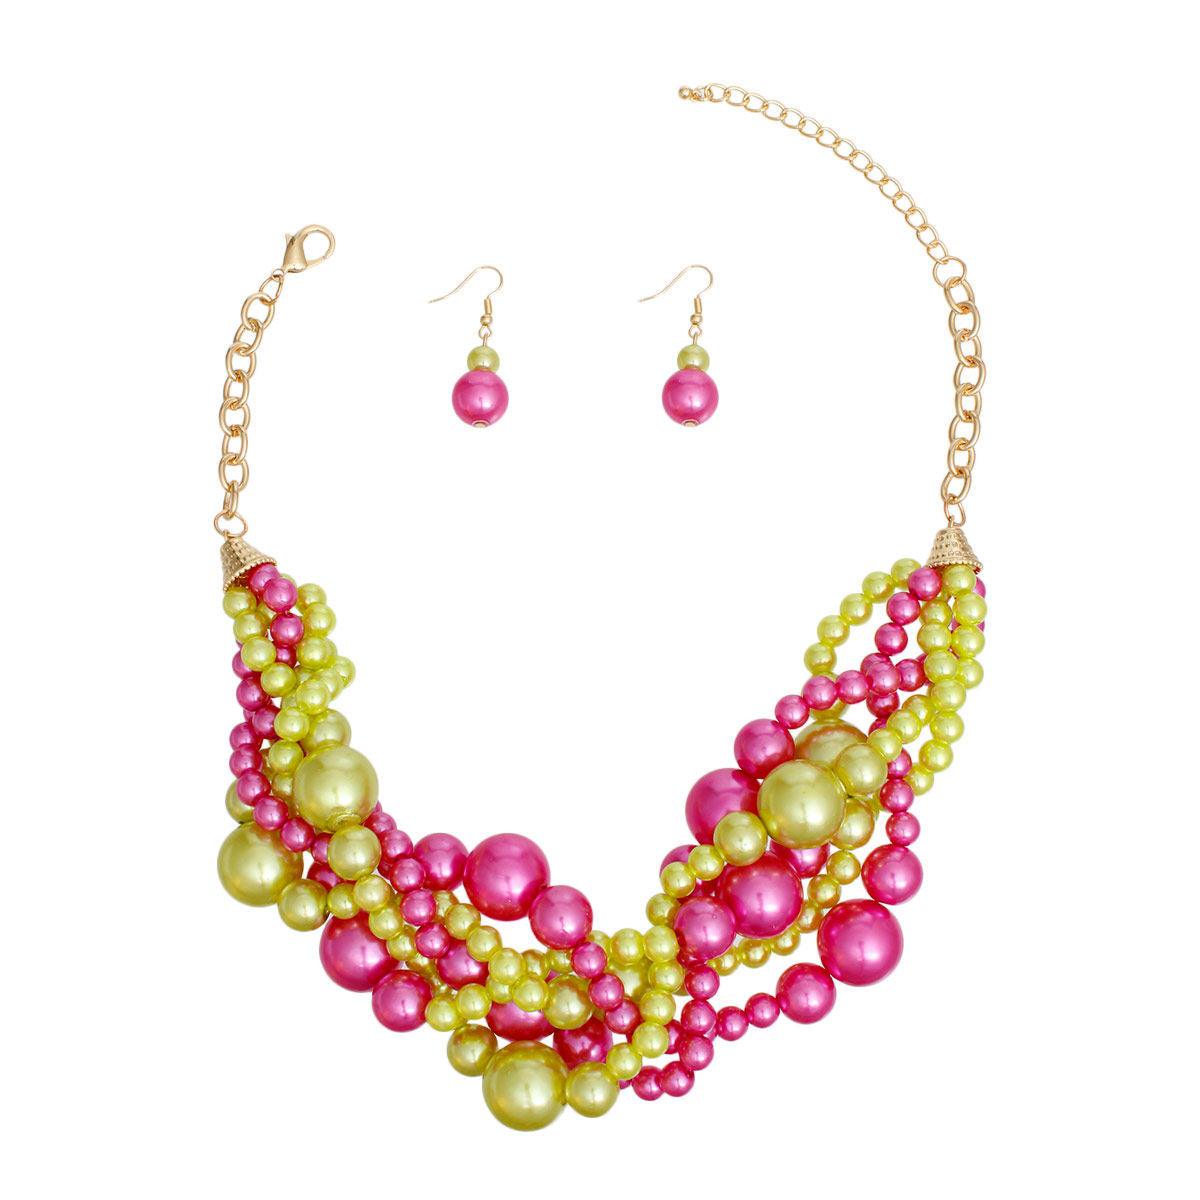 Vibrant Torsade Necklace with Pink Limetta Pearls & Matching Earrings